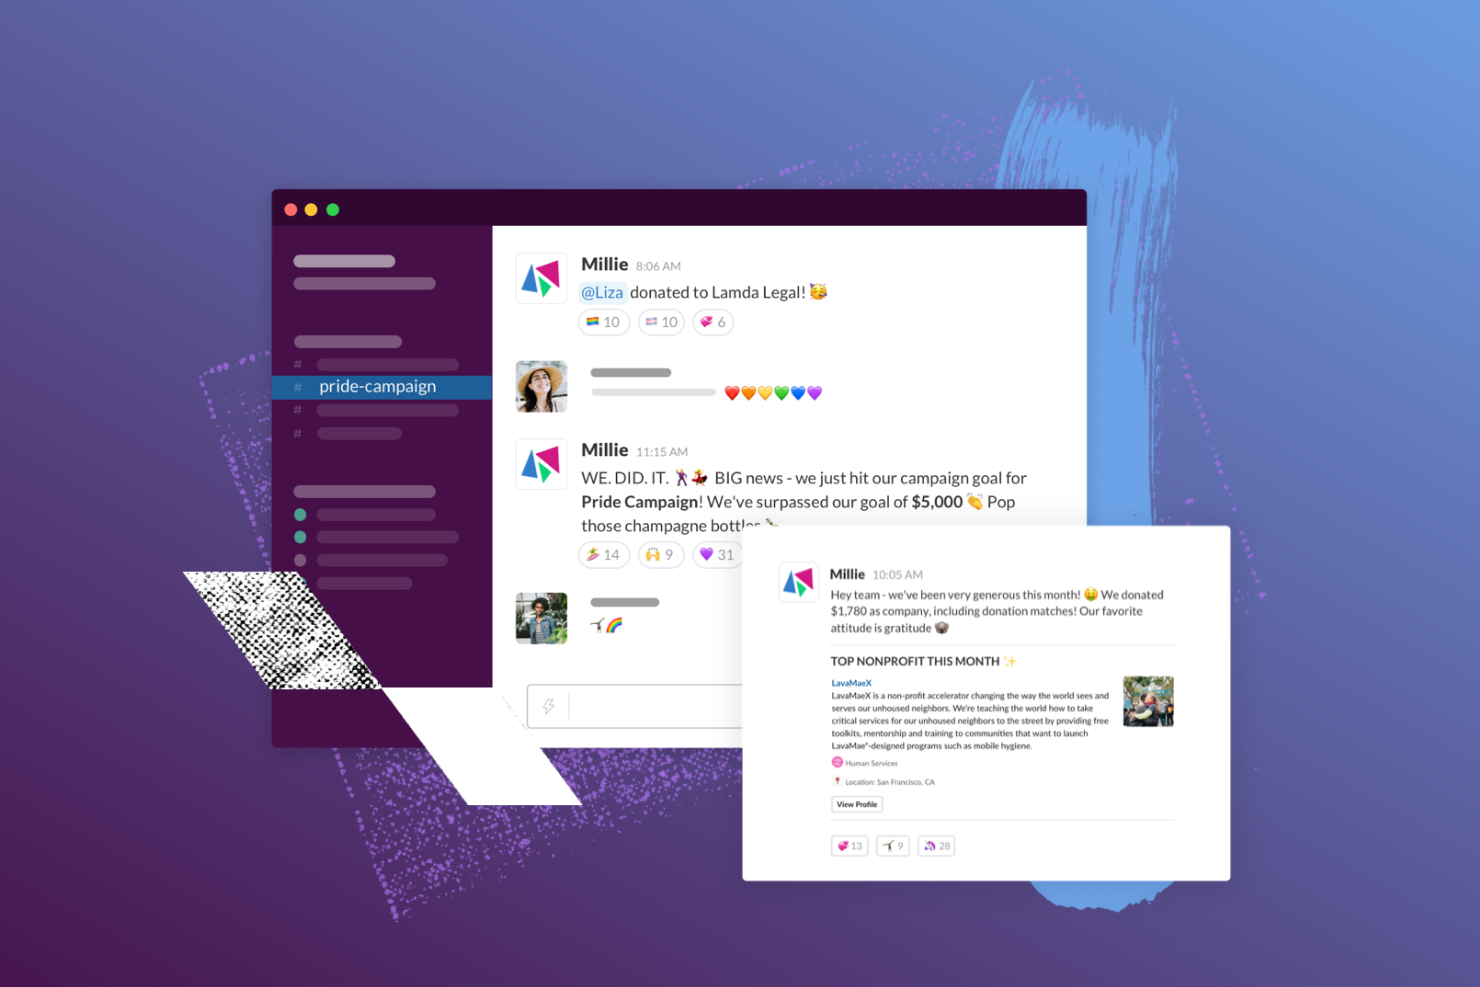 Give back on Slack! With easy access commands, monthly messages, celebratory milestones, and many more automations, the Millie Slack app helps you build a community around giving back.